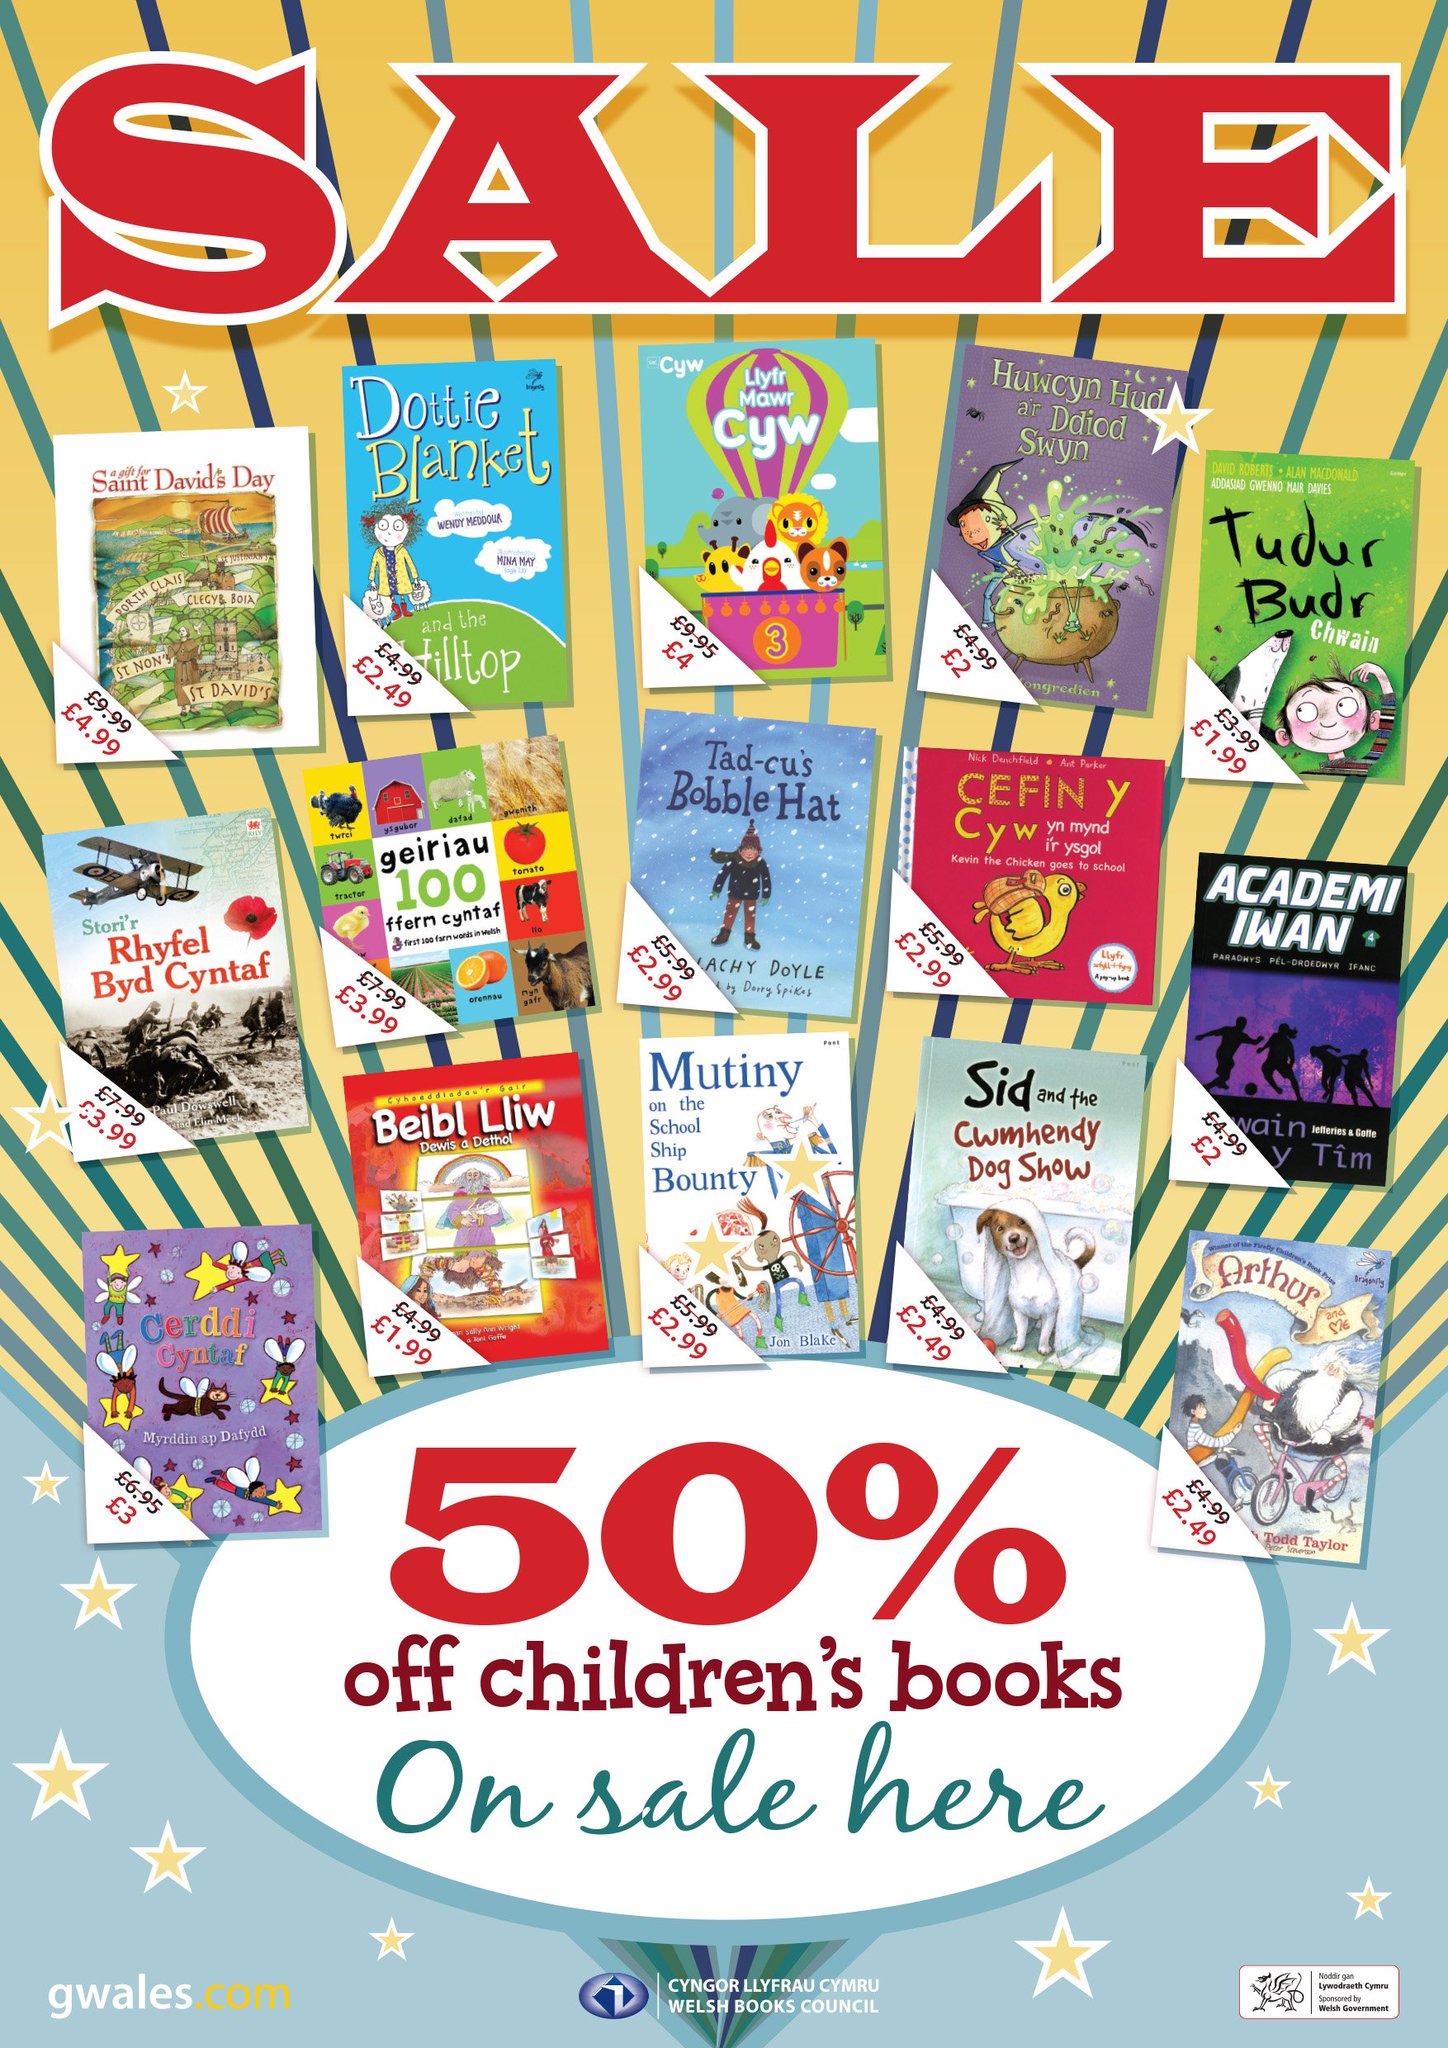 Books Council Of Wales On Twitter Childrens Book Sale - 